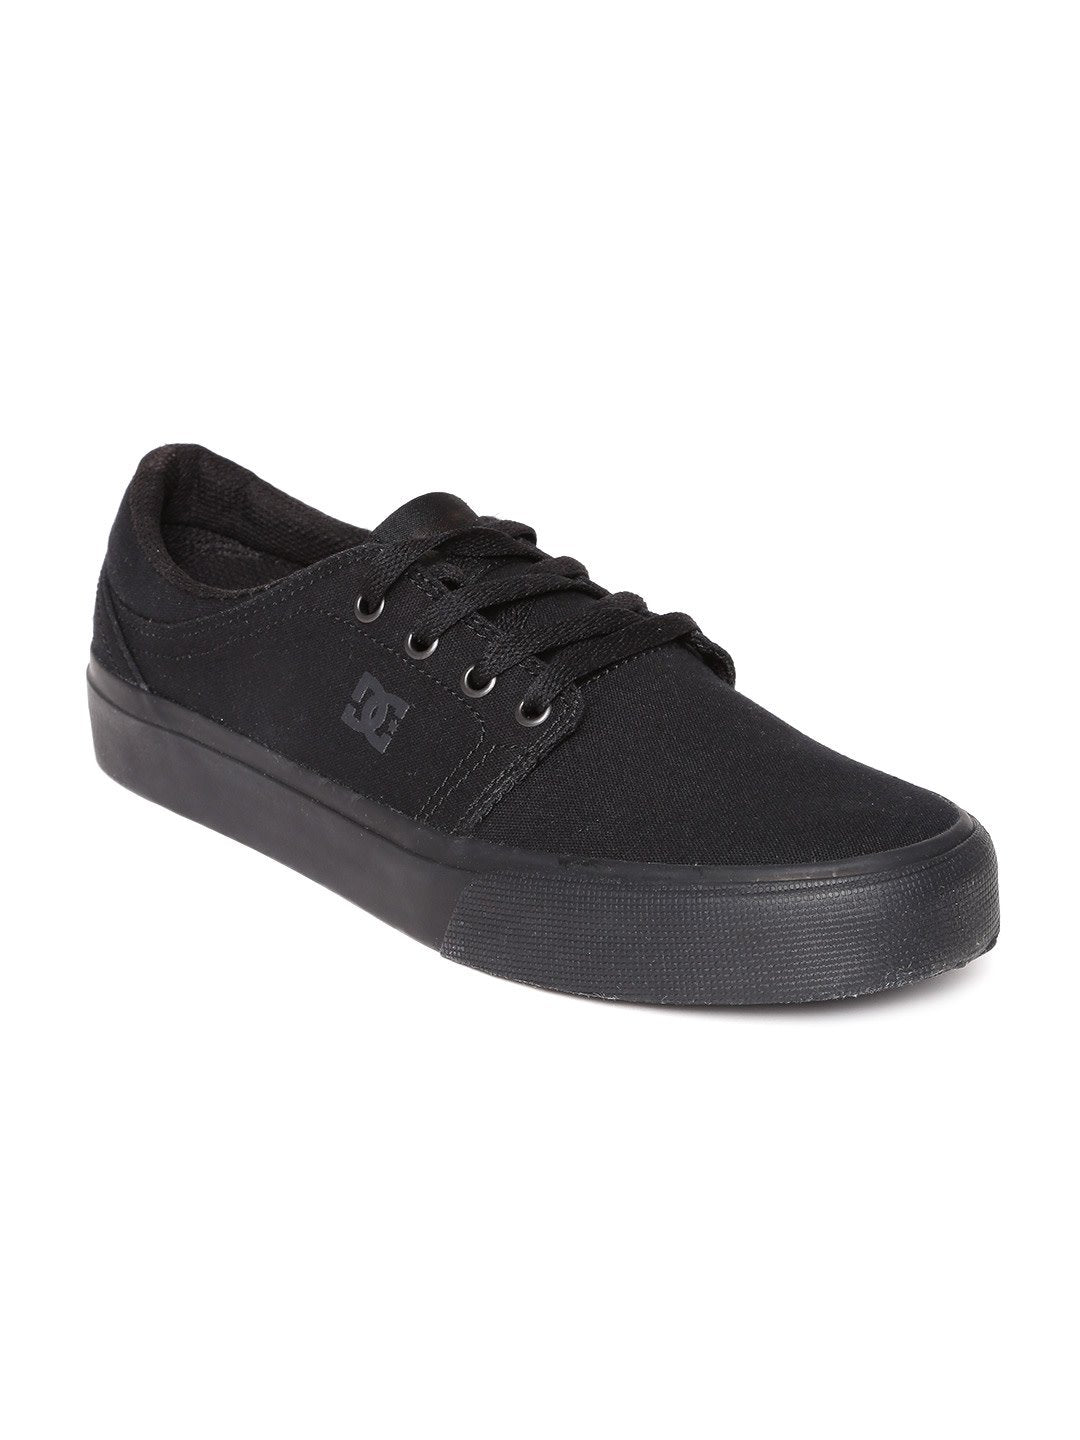 Black Trase TX Sneakers - Discount Store